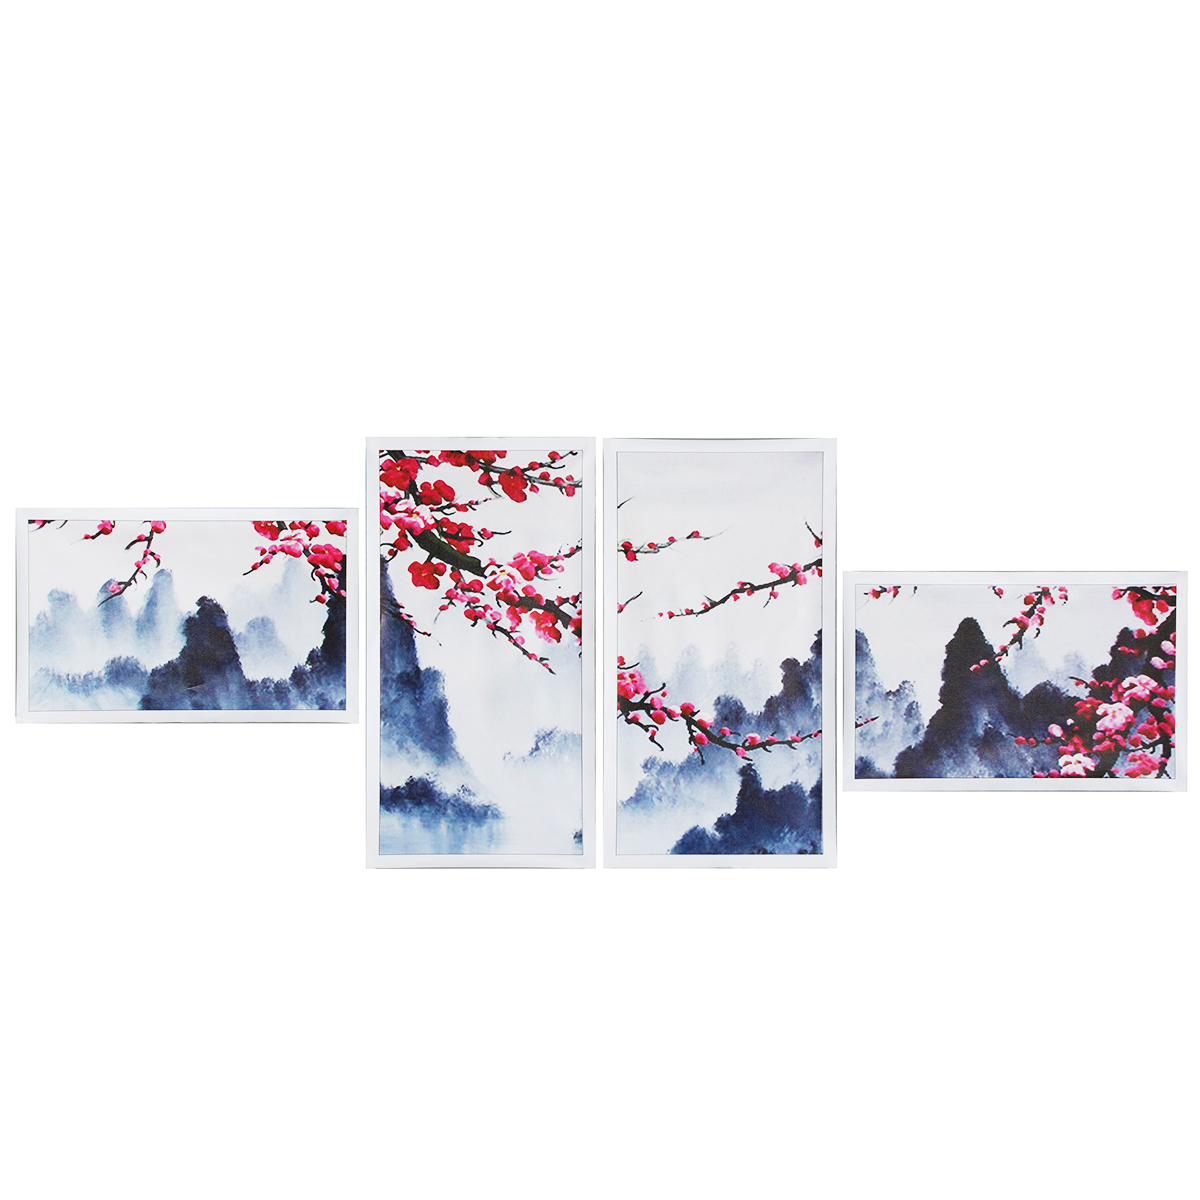 4-Pcs-Wall-Decorative-Painting-Modern-Abstract-Wall-Decor-Plum-Blossom-Art-Pictures-Canvas-Prints-Ho-1319561-1